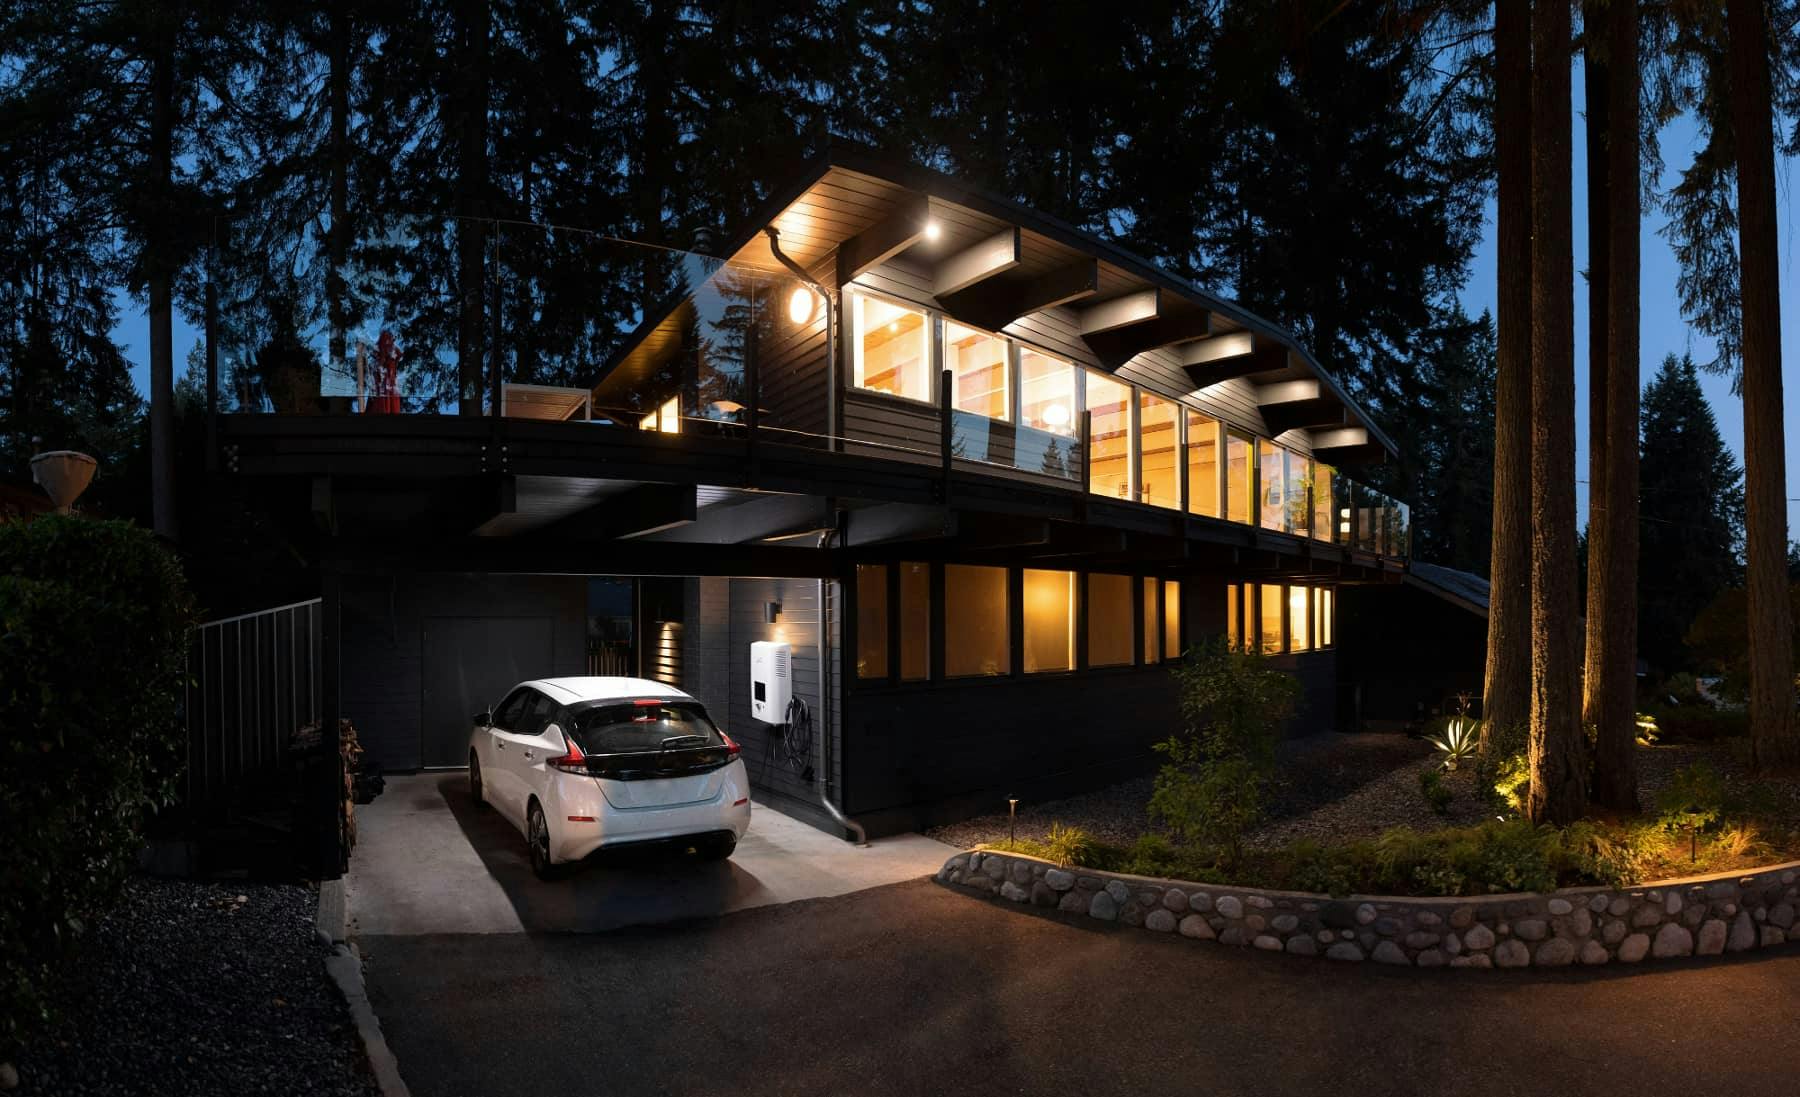 Modern house with an ev car in the driveway